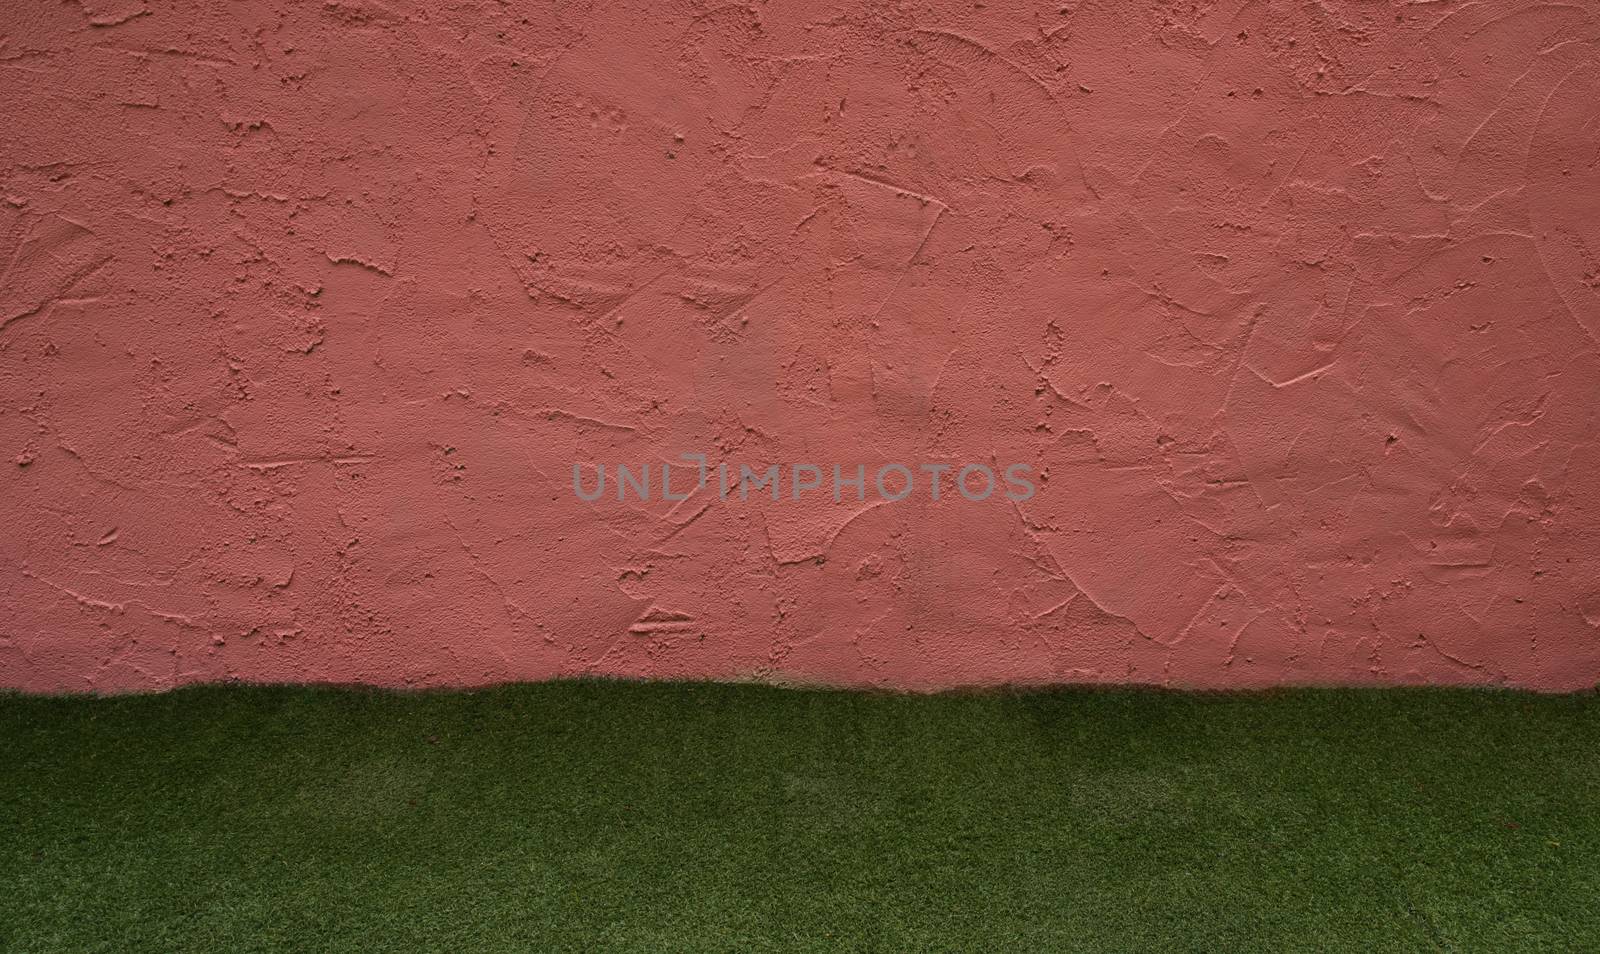 Red-brown cement wall With artificial turf underneath used as background for inserting text.